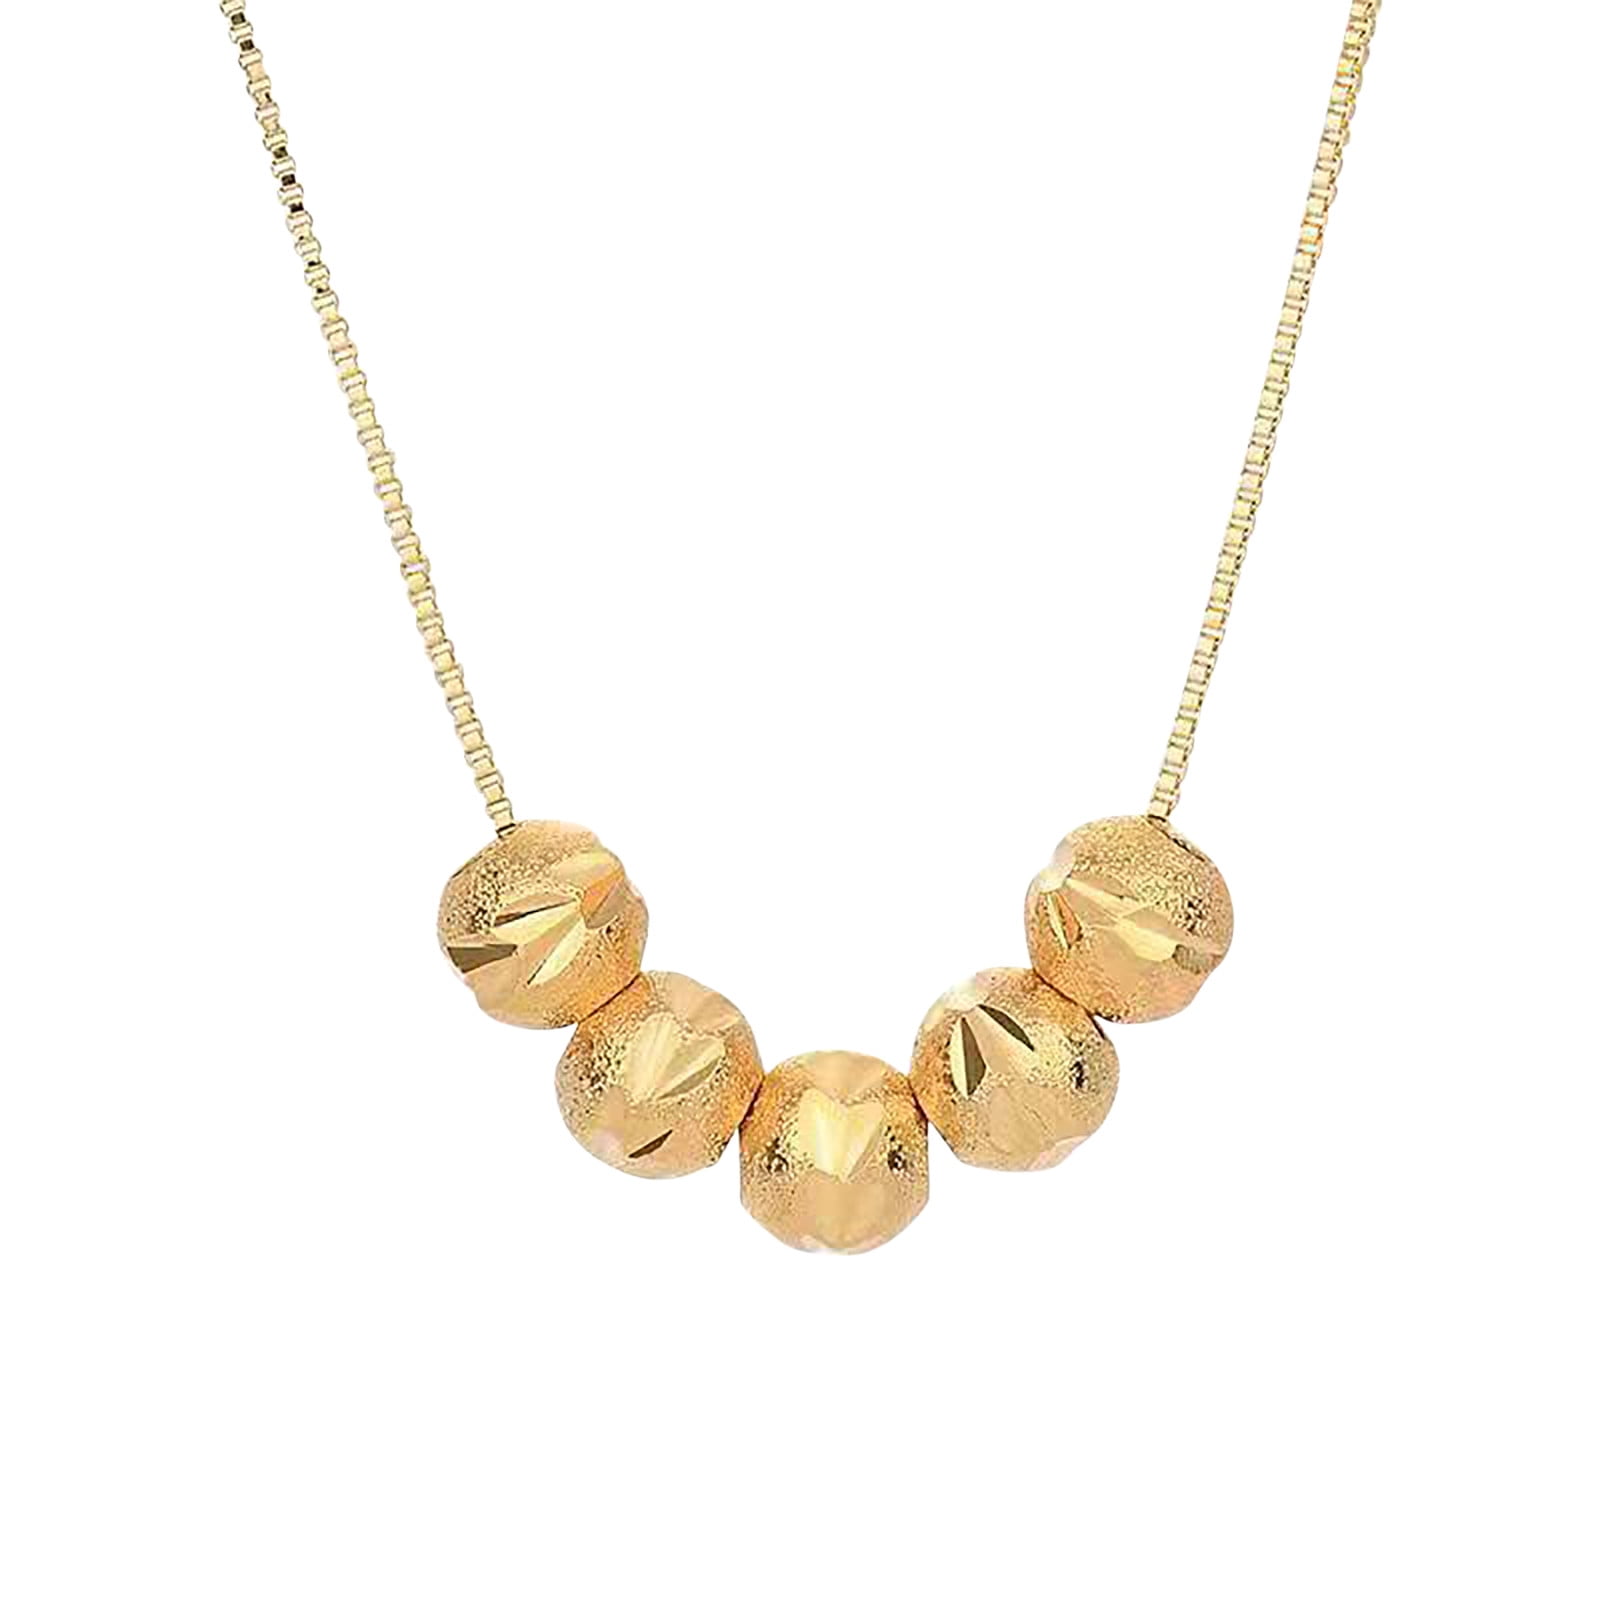 Wmkox8yii Necklace Gold Color Transfer Bead Car Flower Clavicle Chain 